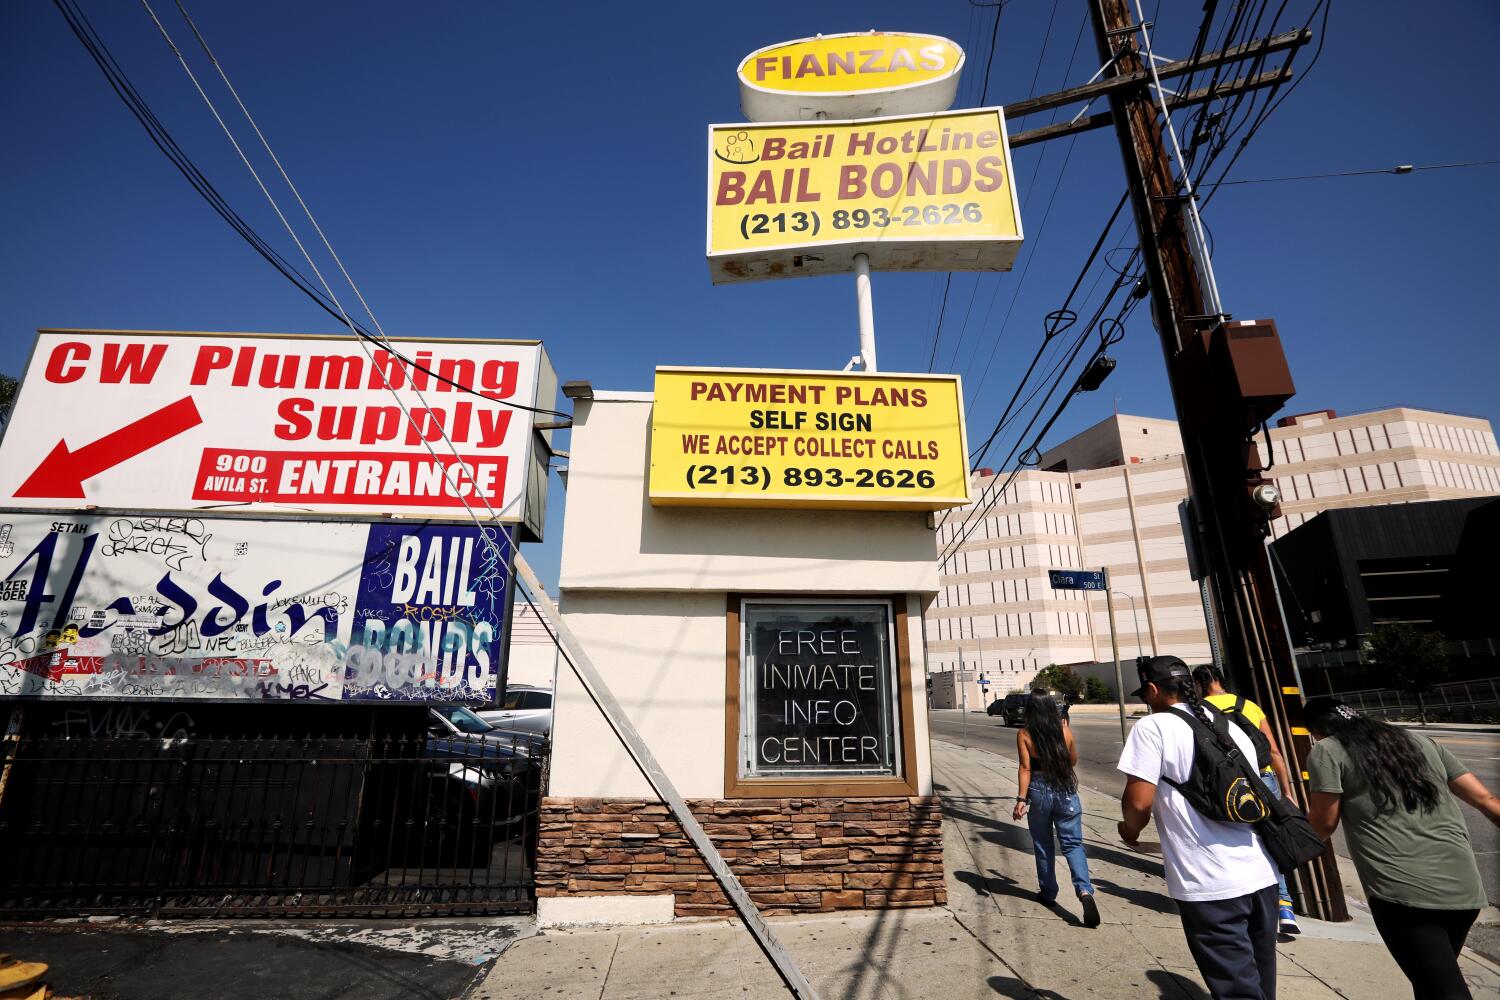 Editorial: Leaders aren't leading on L.A. bail reform